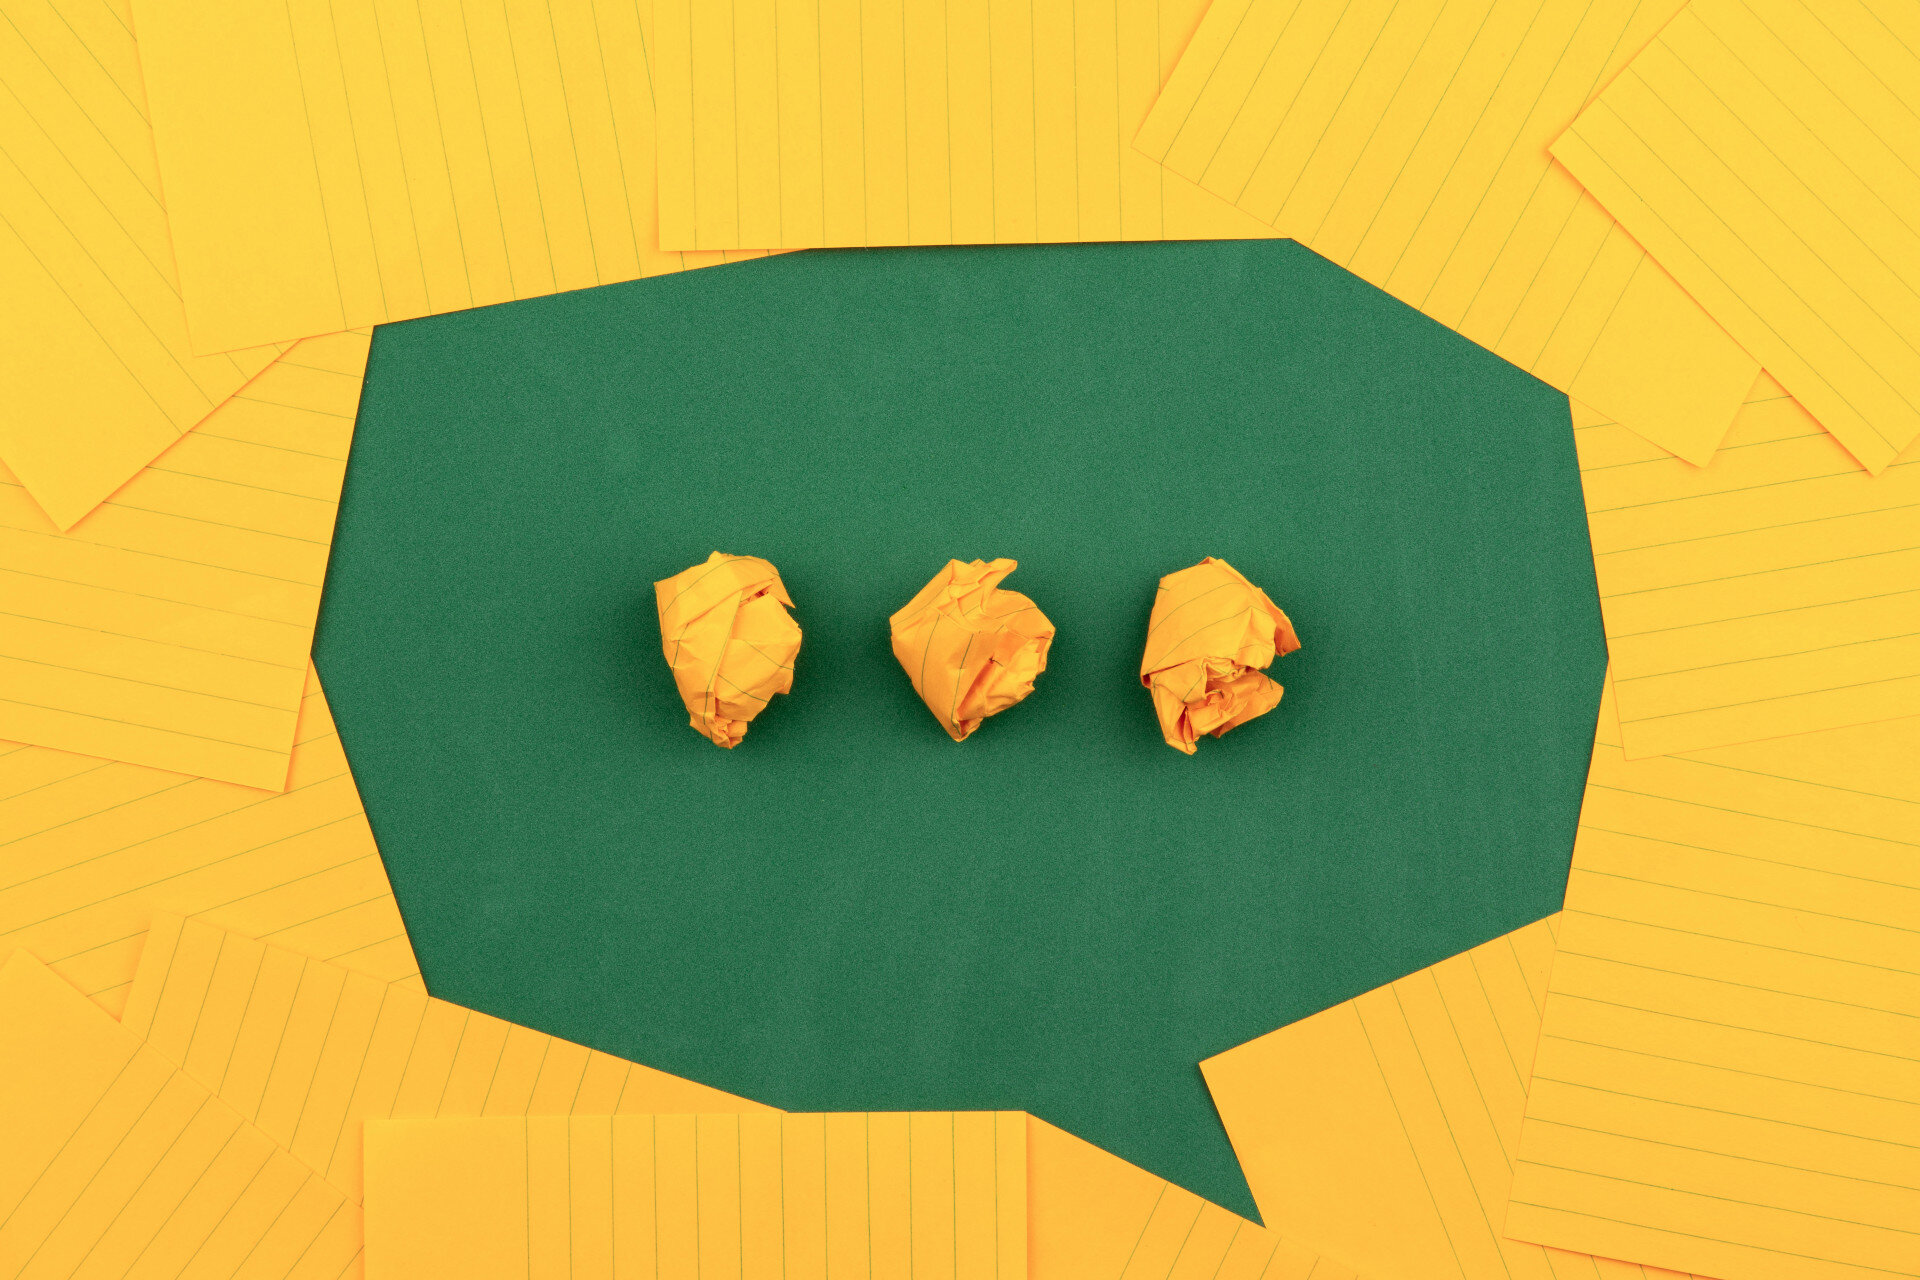 Stock photograph by Volodymyr Hryshchenko. Image ID: orange sheets of paper on top of green construction paper form a chat bubble with three crumpled orange balls of paper to suggest that someone is preparing to say something.